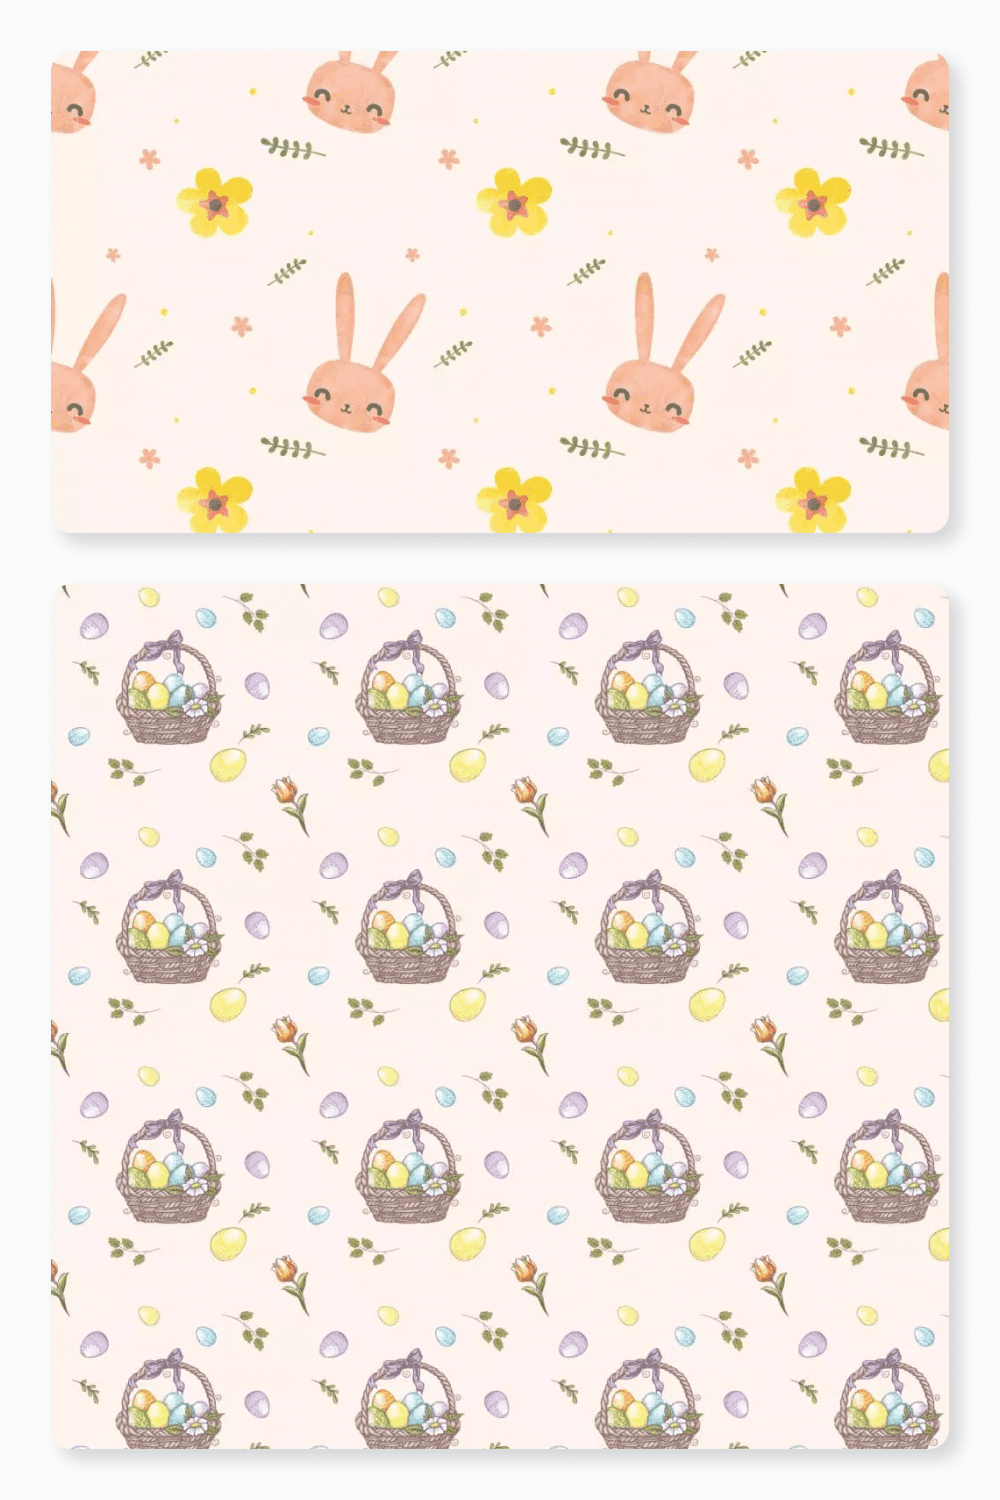 Collage of patterns depicting a rabbit, flowers, eggs and an Easter basket.